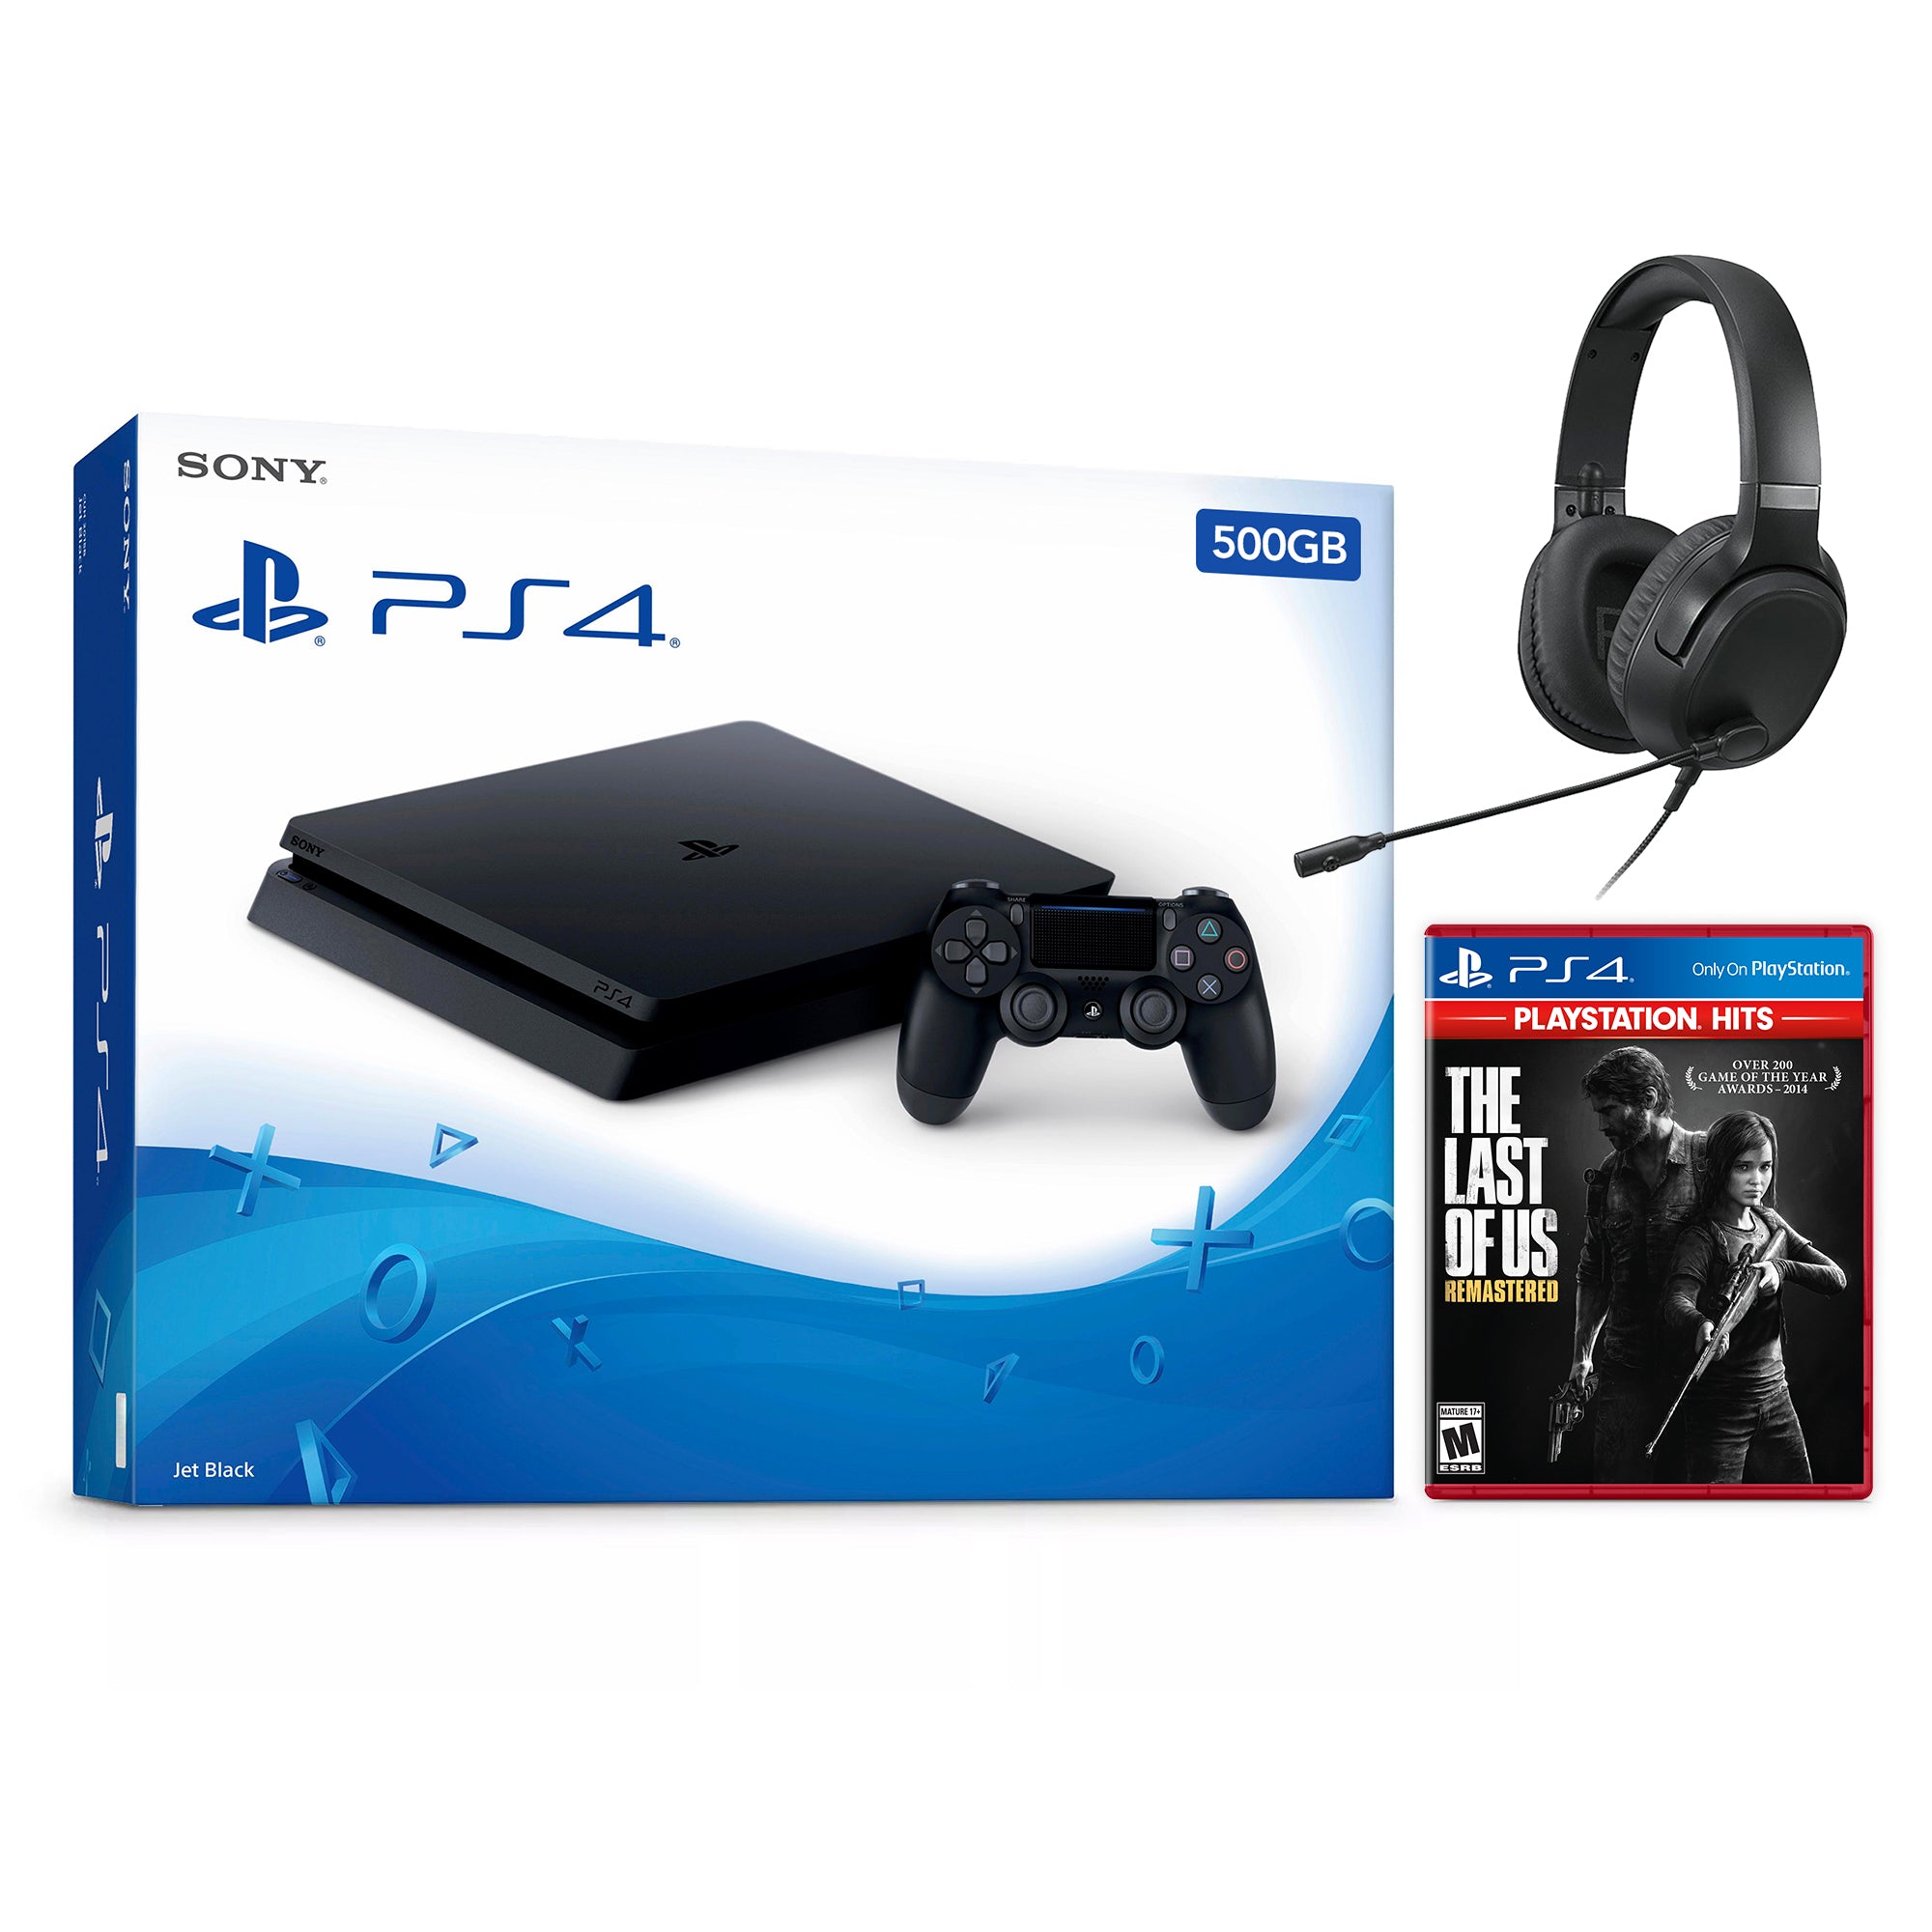 Sony PlayStation 4 Slim Call of Duty Modern Warfare II Bundle 500GB PS4 Gaming Console, Jet Black, with Mytrix Chat Headset